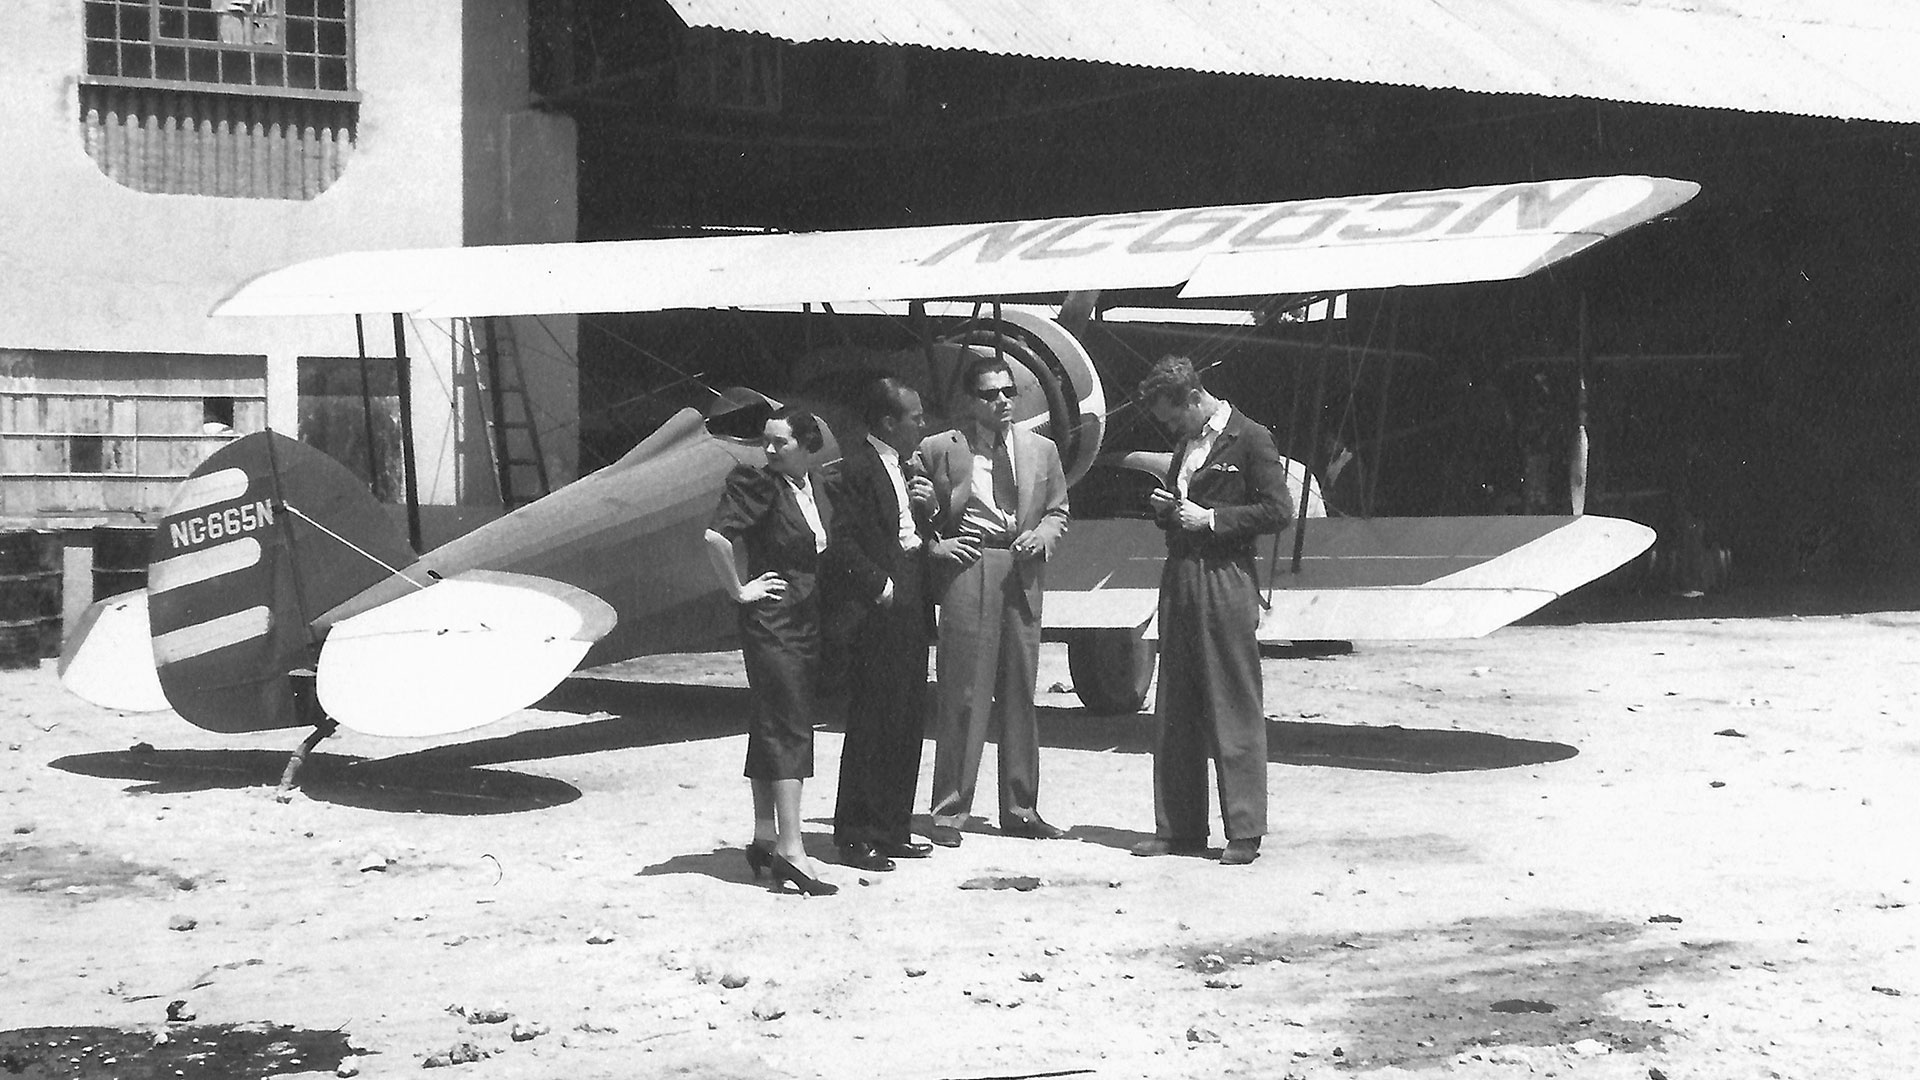 (Coates with biplane) Donald Coates’ tale about his film experience with Errol Flynn and Ernest Hemingway may have had something to do with his negotiations to acquire a two-seater observation biplane in 1946 at a Los Angeles-area airfield.